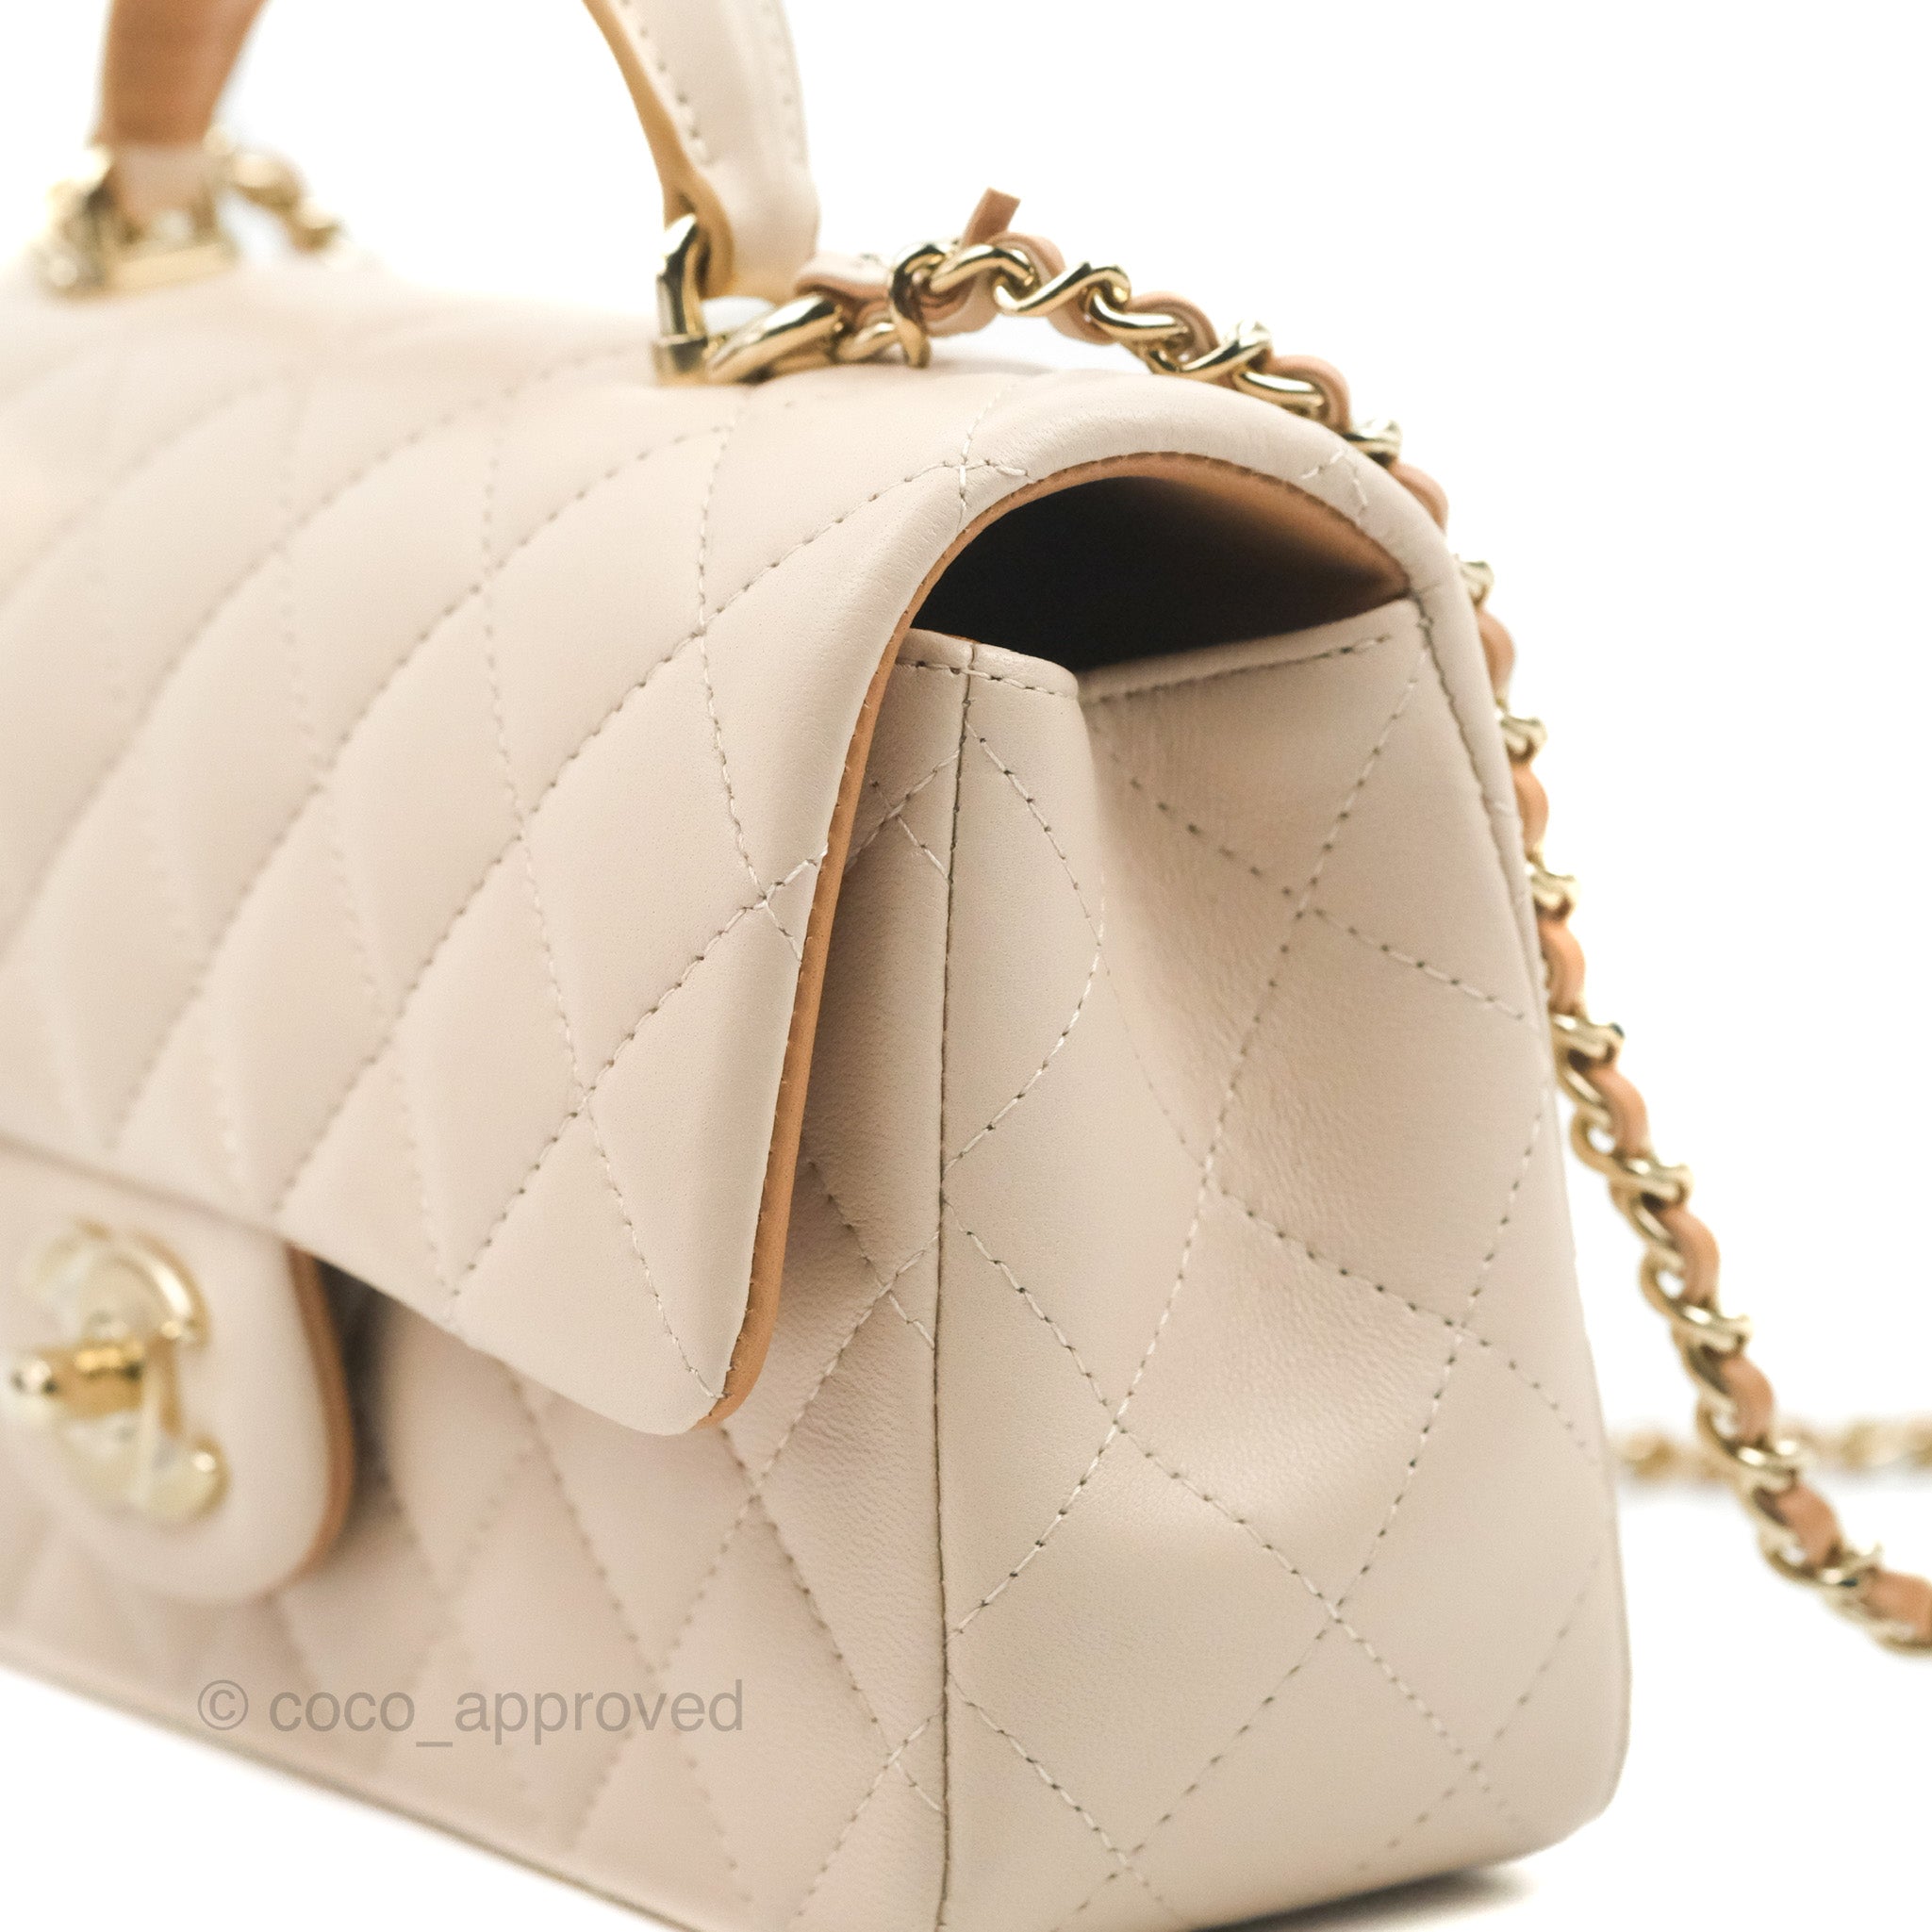 Chanel Mini Flap Bag with Top Handle AS4304 B13786 NQ334 , Beige, One Size